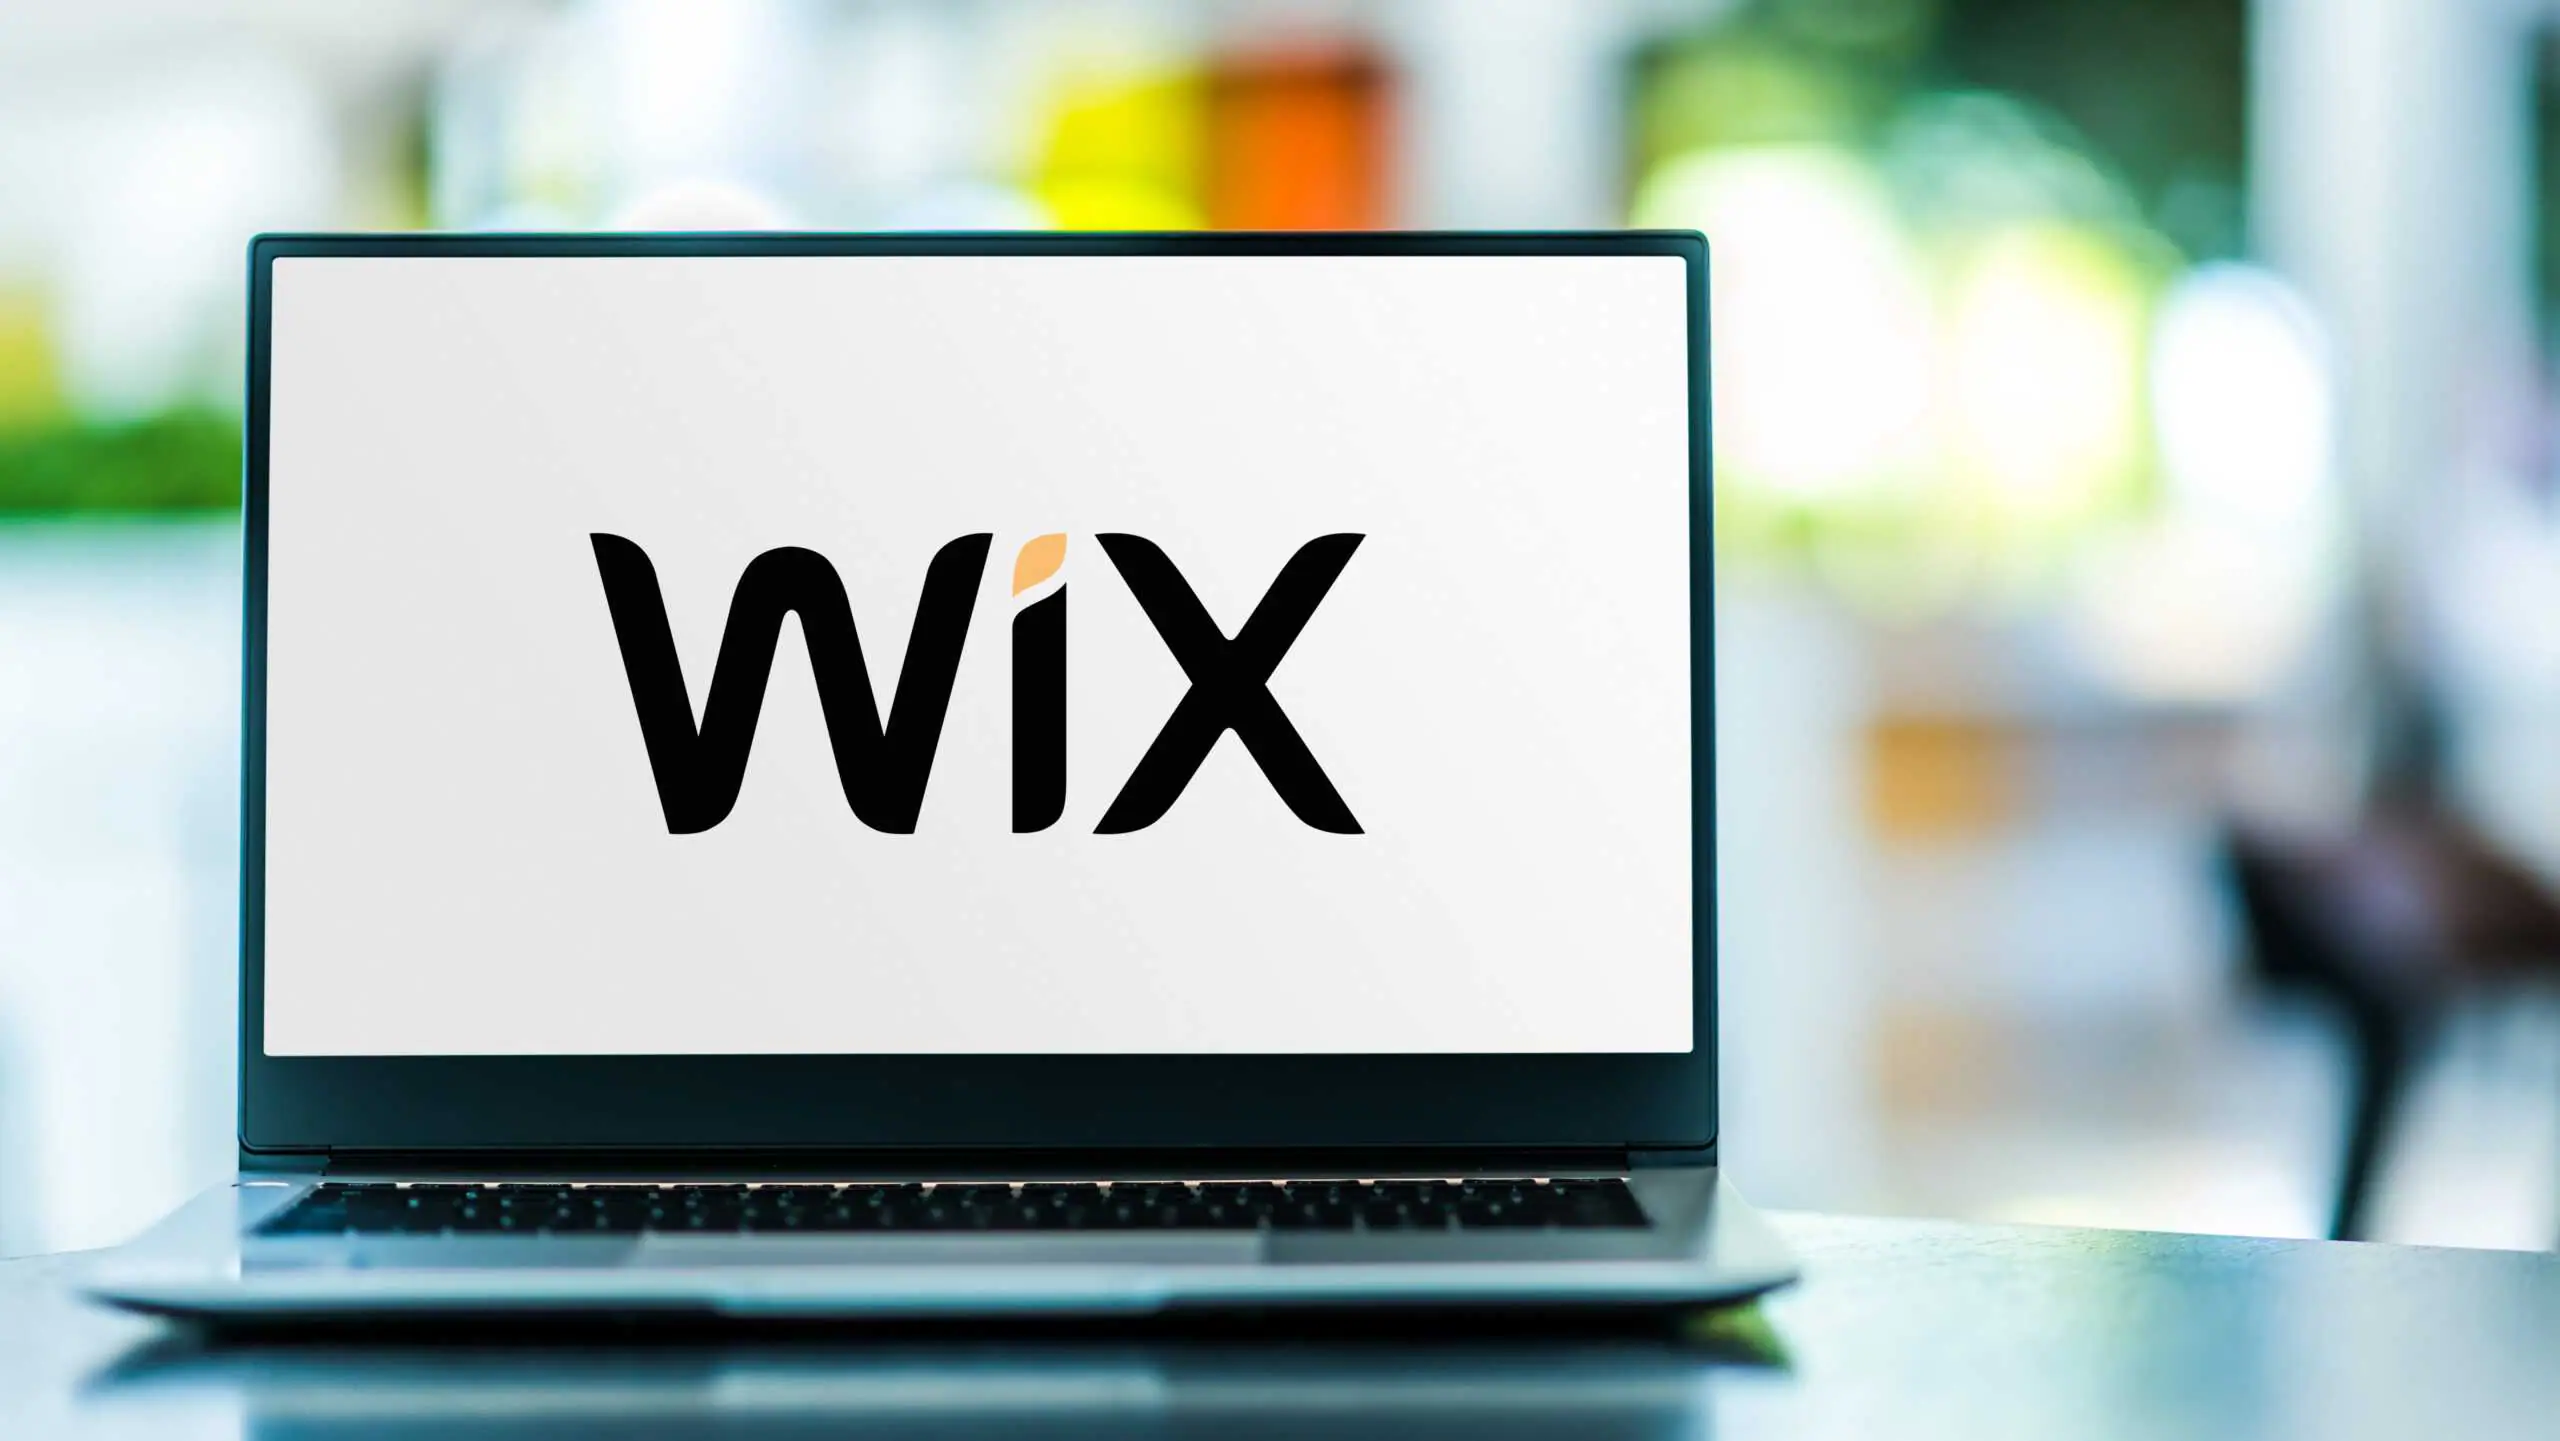 Media: How to Use Wix in 2023: Step-by-Step Guide